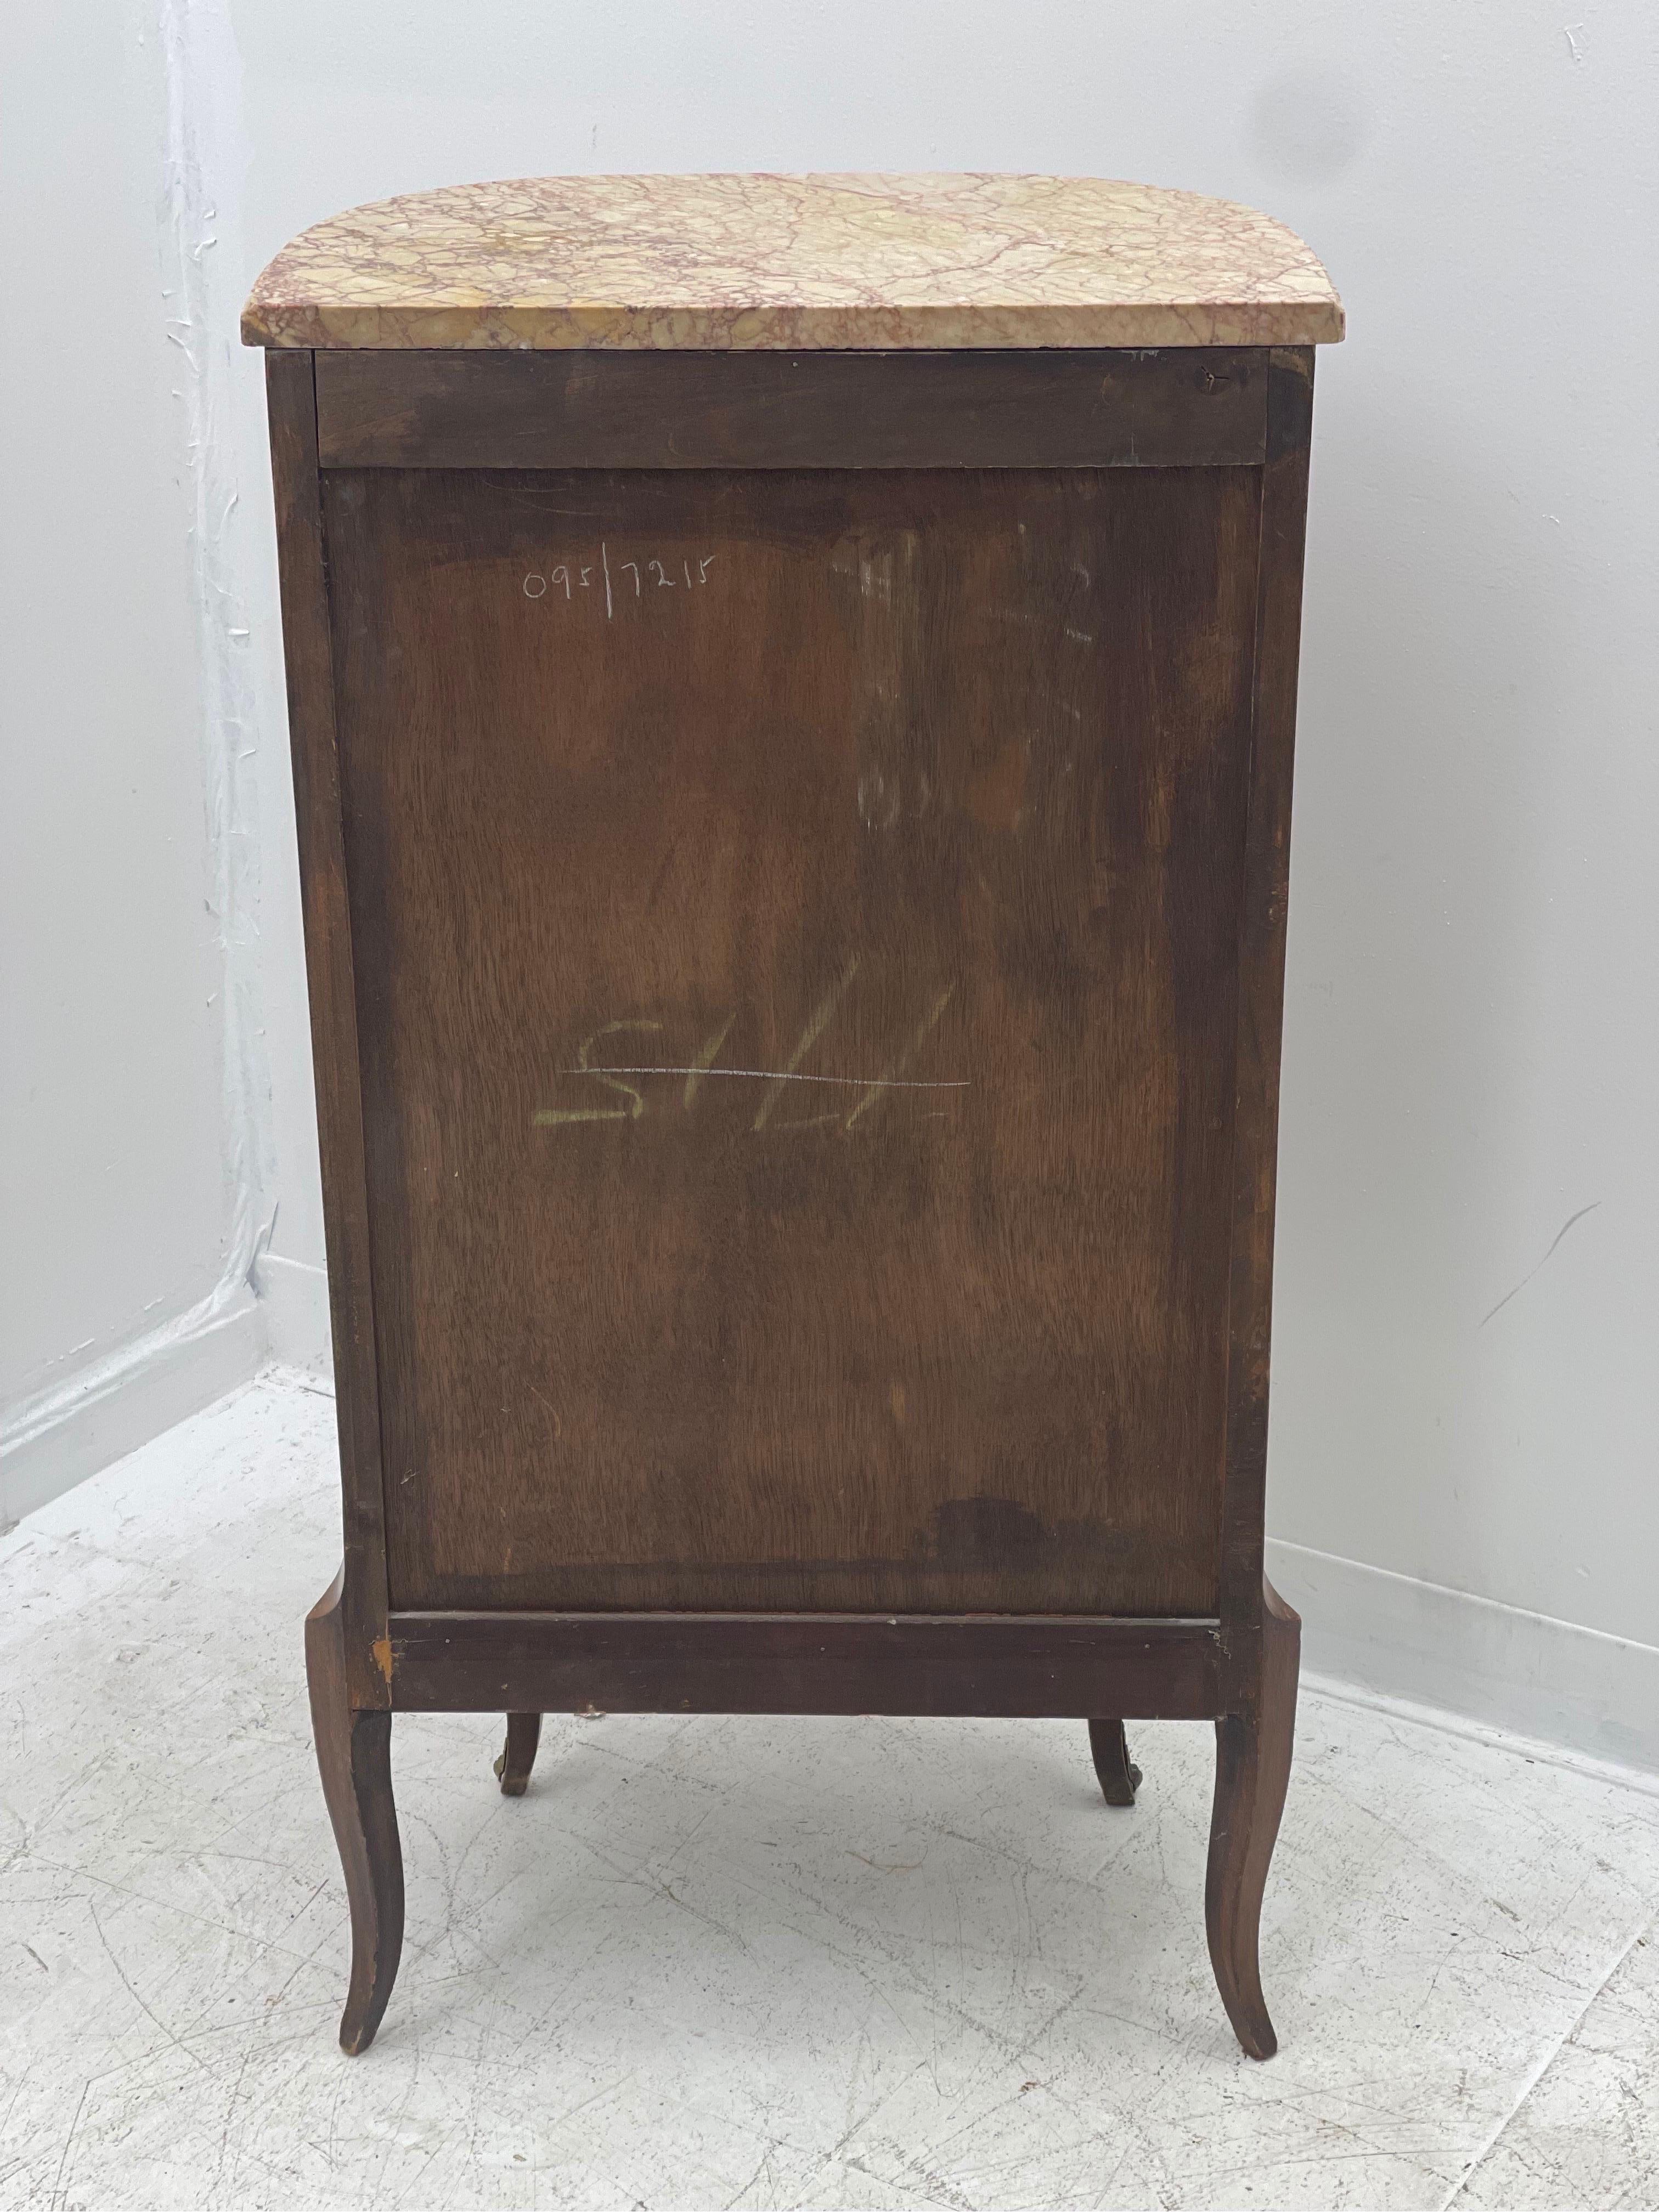 Edwardian Lingerie Chest Circa, 1900s Marble Top Dovetail Drawers Cabinet In Good Condition For Sale In Seattle, WA